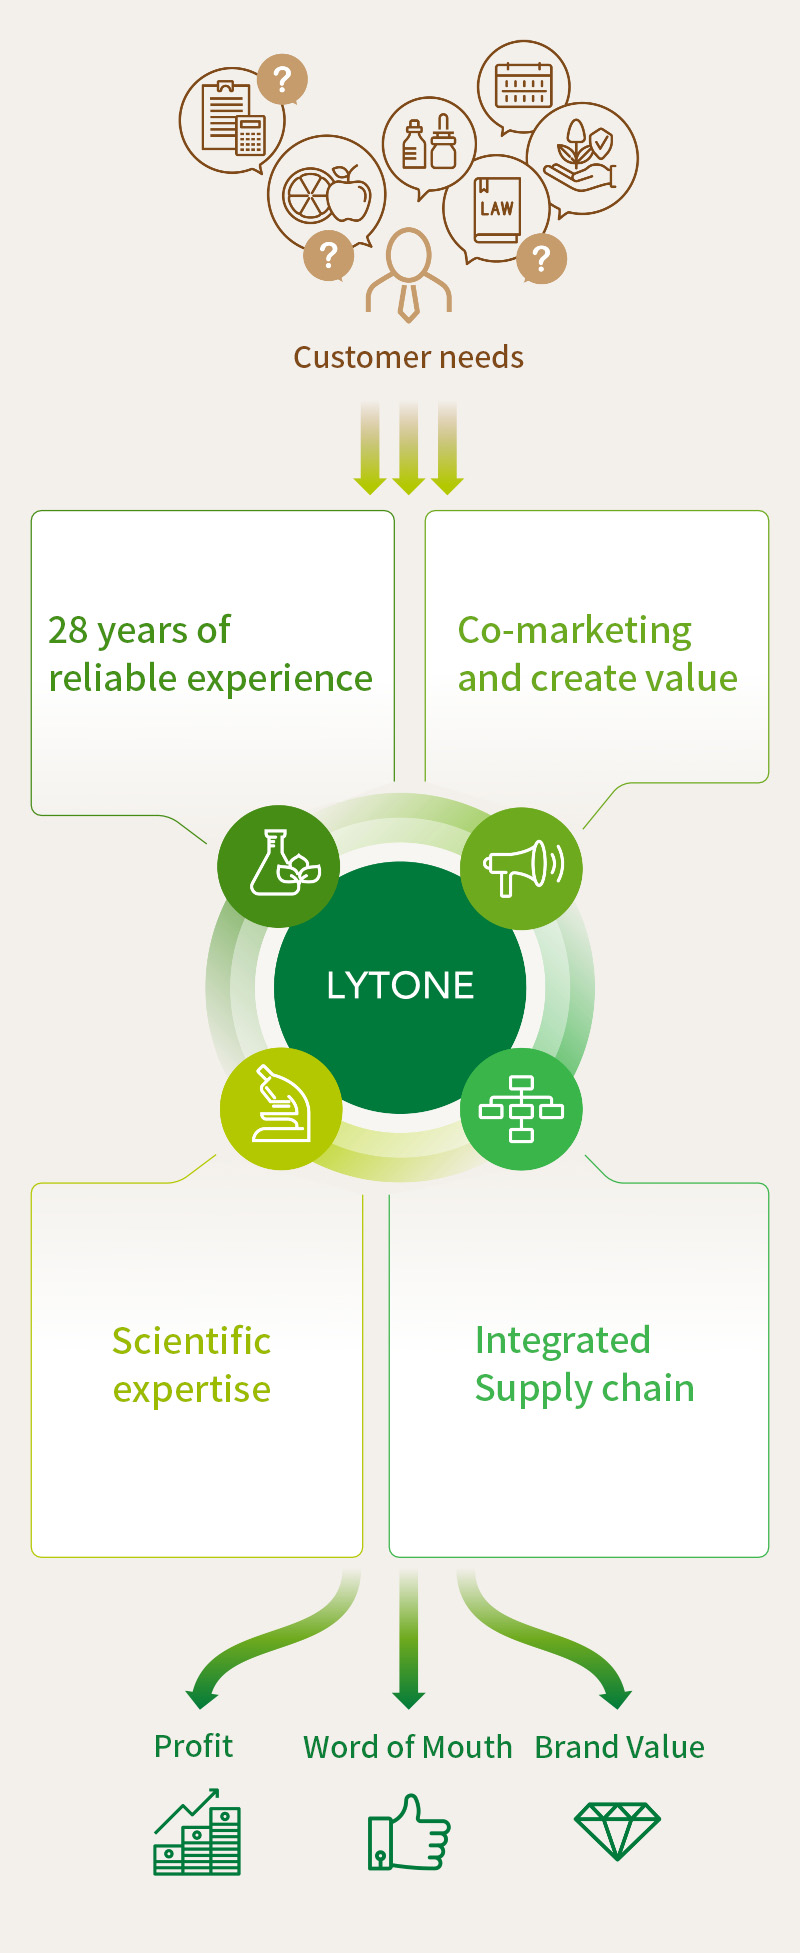 LYTONE 28 year reliable experience, Co-marketing and create value, Scientific expertise, Integrated Supply chain, Word of Mouth, Brand Value